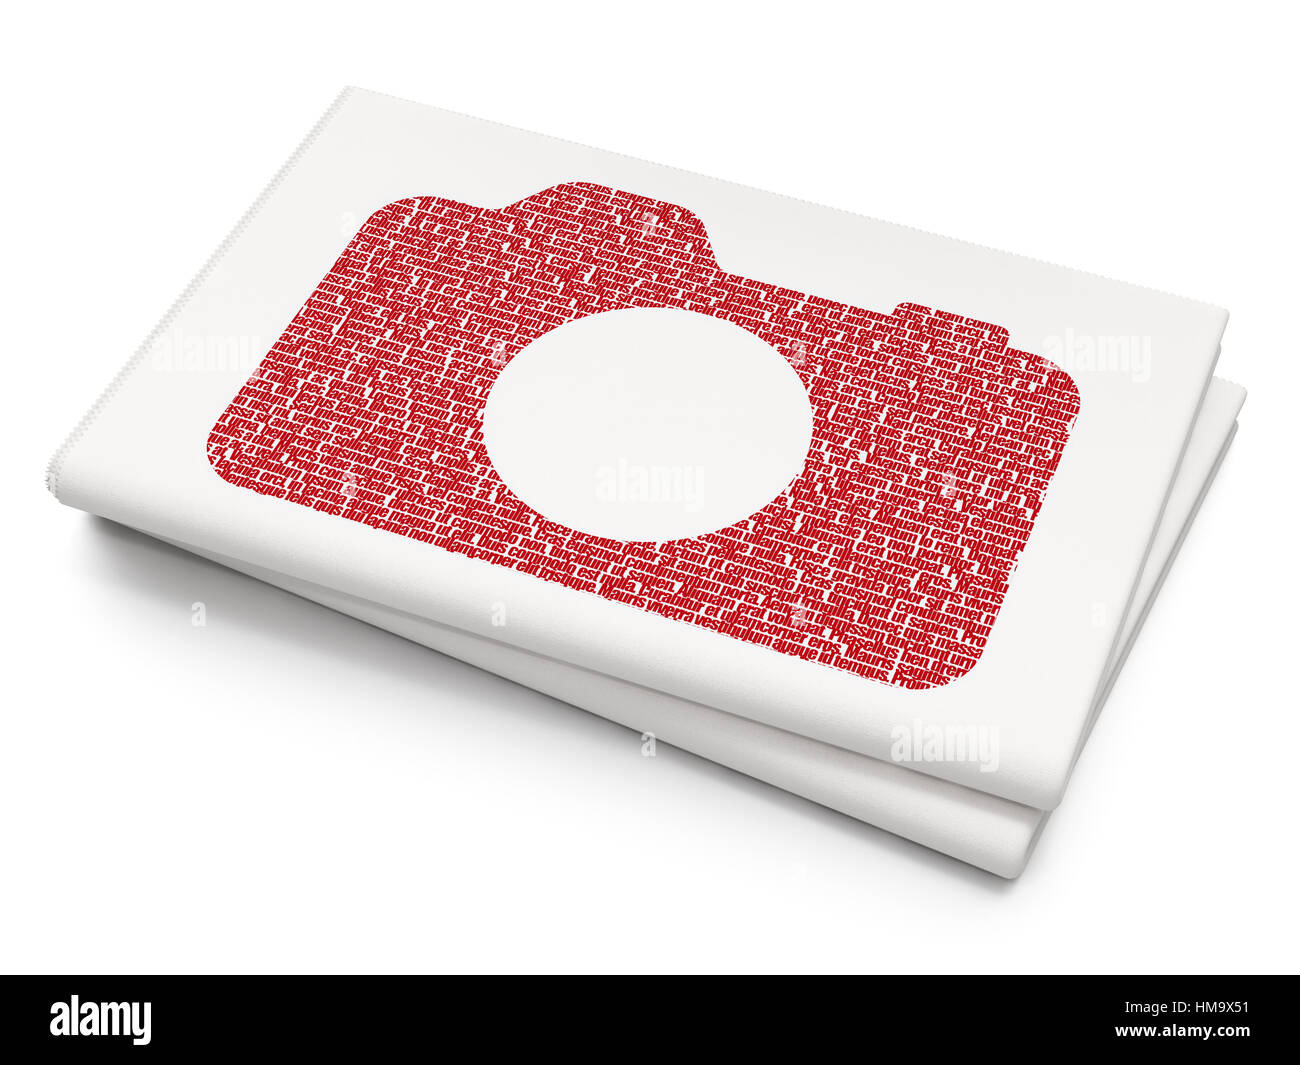 Vacation concept: Pixelated red Photo Camera icon on Blank Newspaper background, 3D rendering Stock Photo